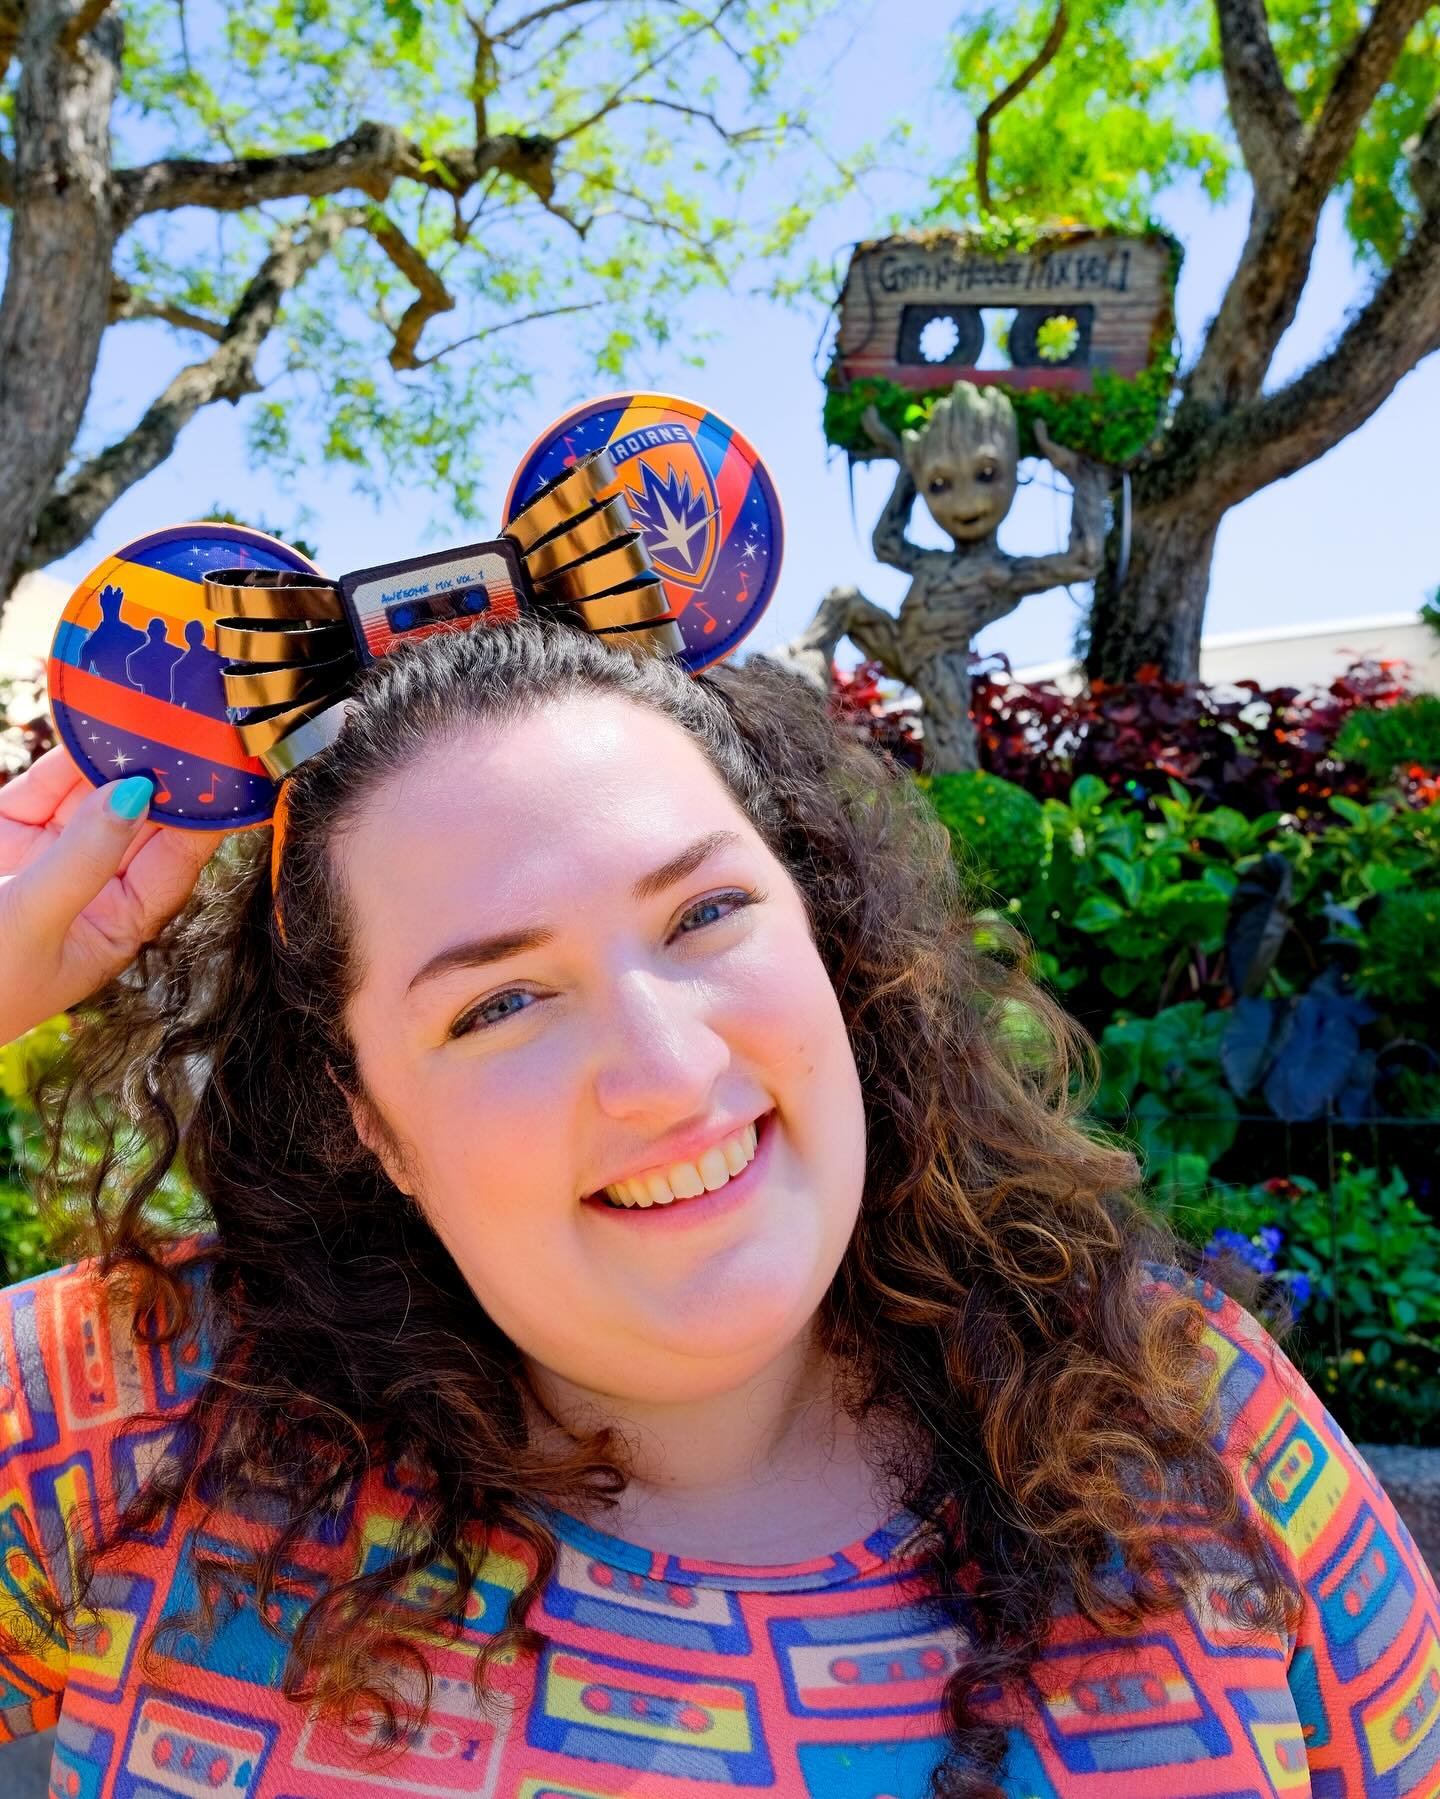 Happy National Super Hero Day and Spaceship Earth Sunday! Recently, we ran over to EPCOT for an 80s / Guardians of the Galaxy themed day and to see A Flock of Seagulls. I was excited to visit the new Groot topiary in my Guardians ears- and someone ga